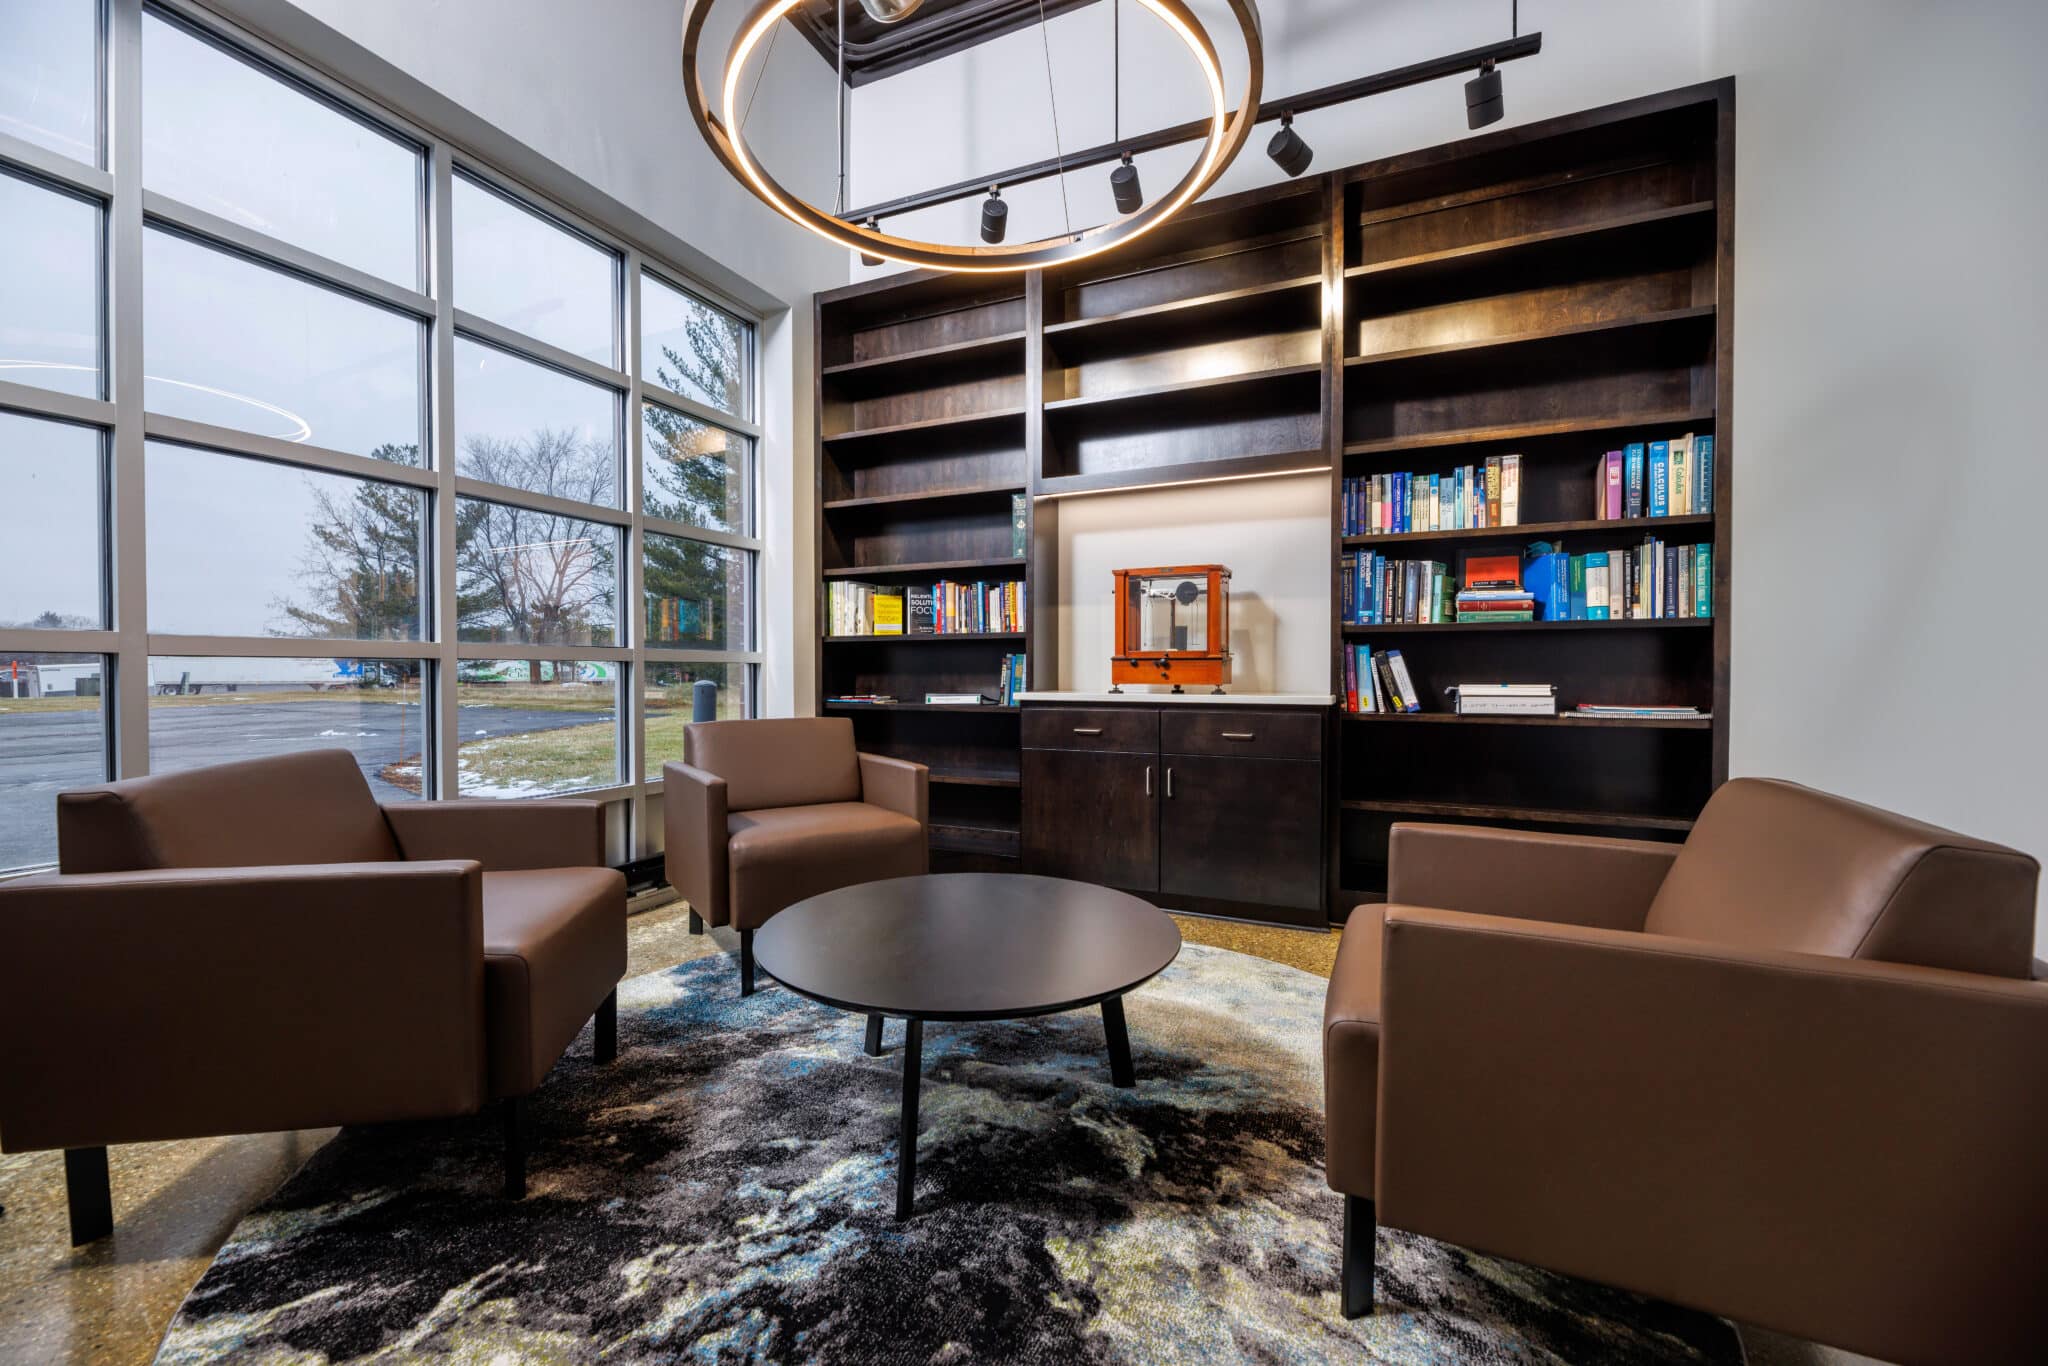 A modern interior at an office shows brown chairs, a wall-length bookshelf, and wall to ceiling windows to encourage natural light.